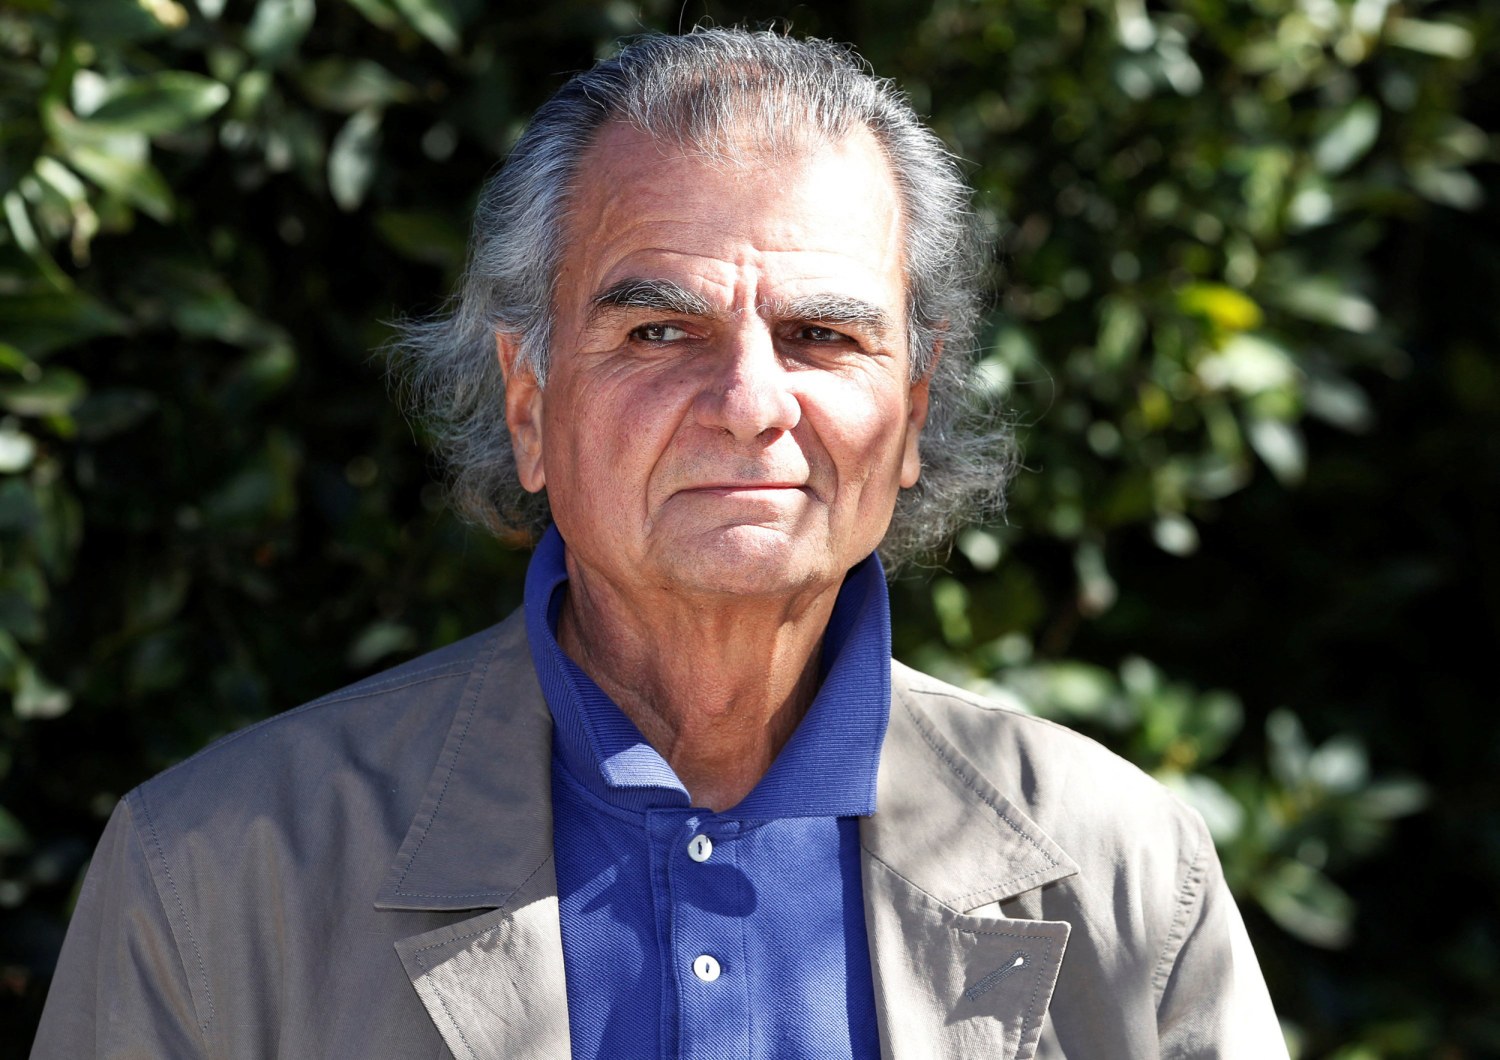 Patrick Demarchelier, famed French fashion photographer, dies at 78